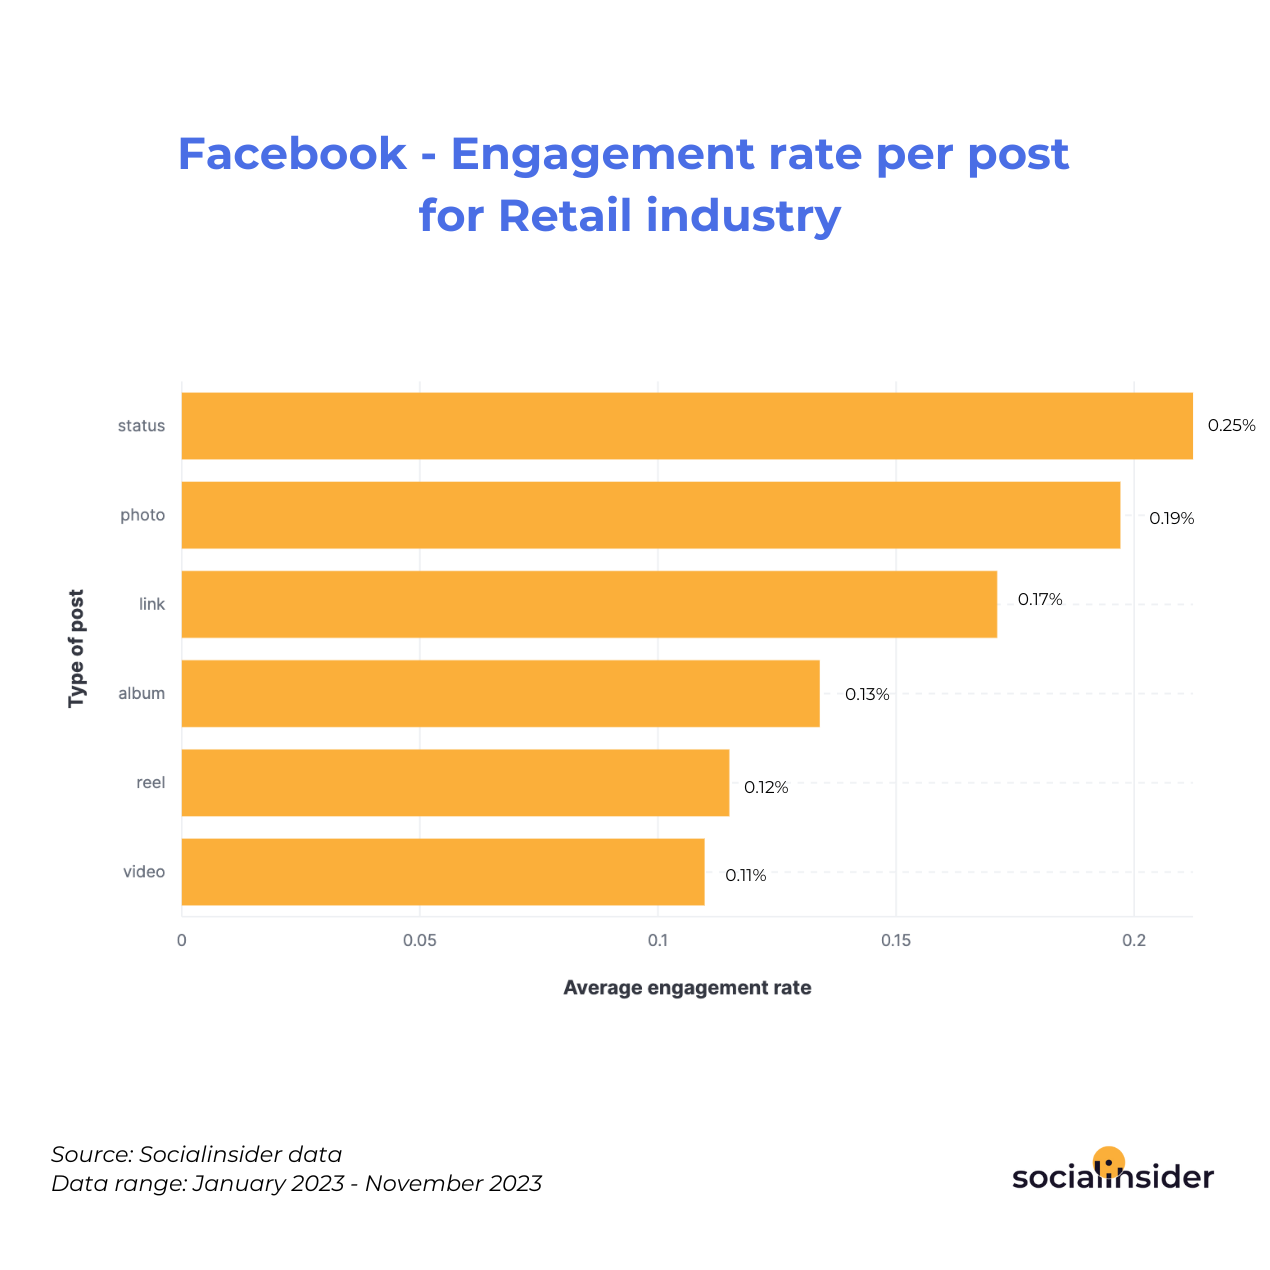 Facebook - Engagement rate per post for Retail industry 